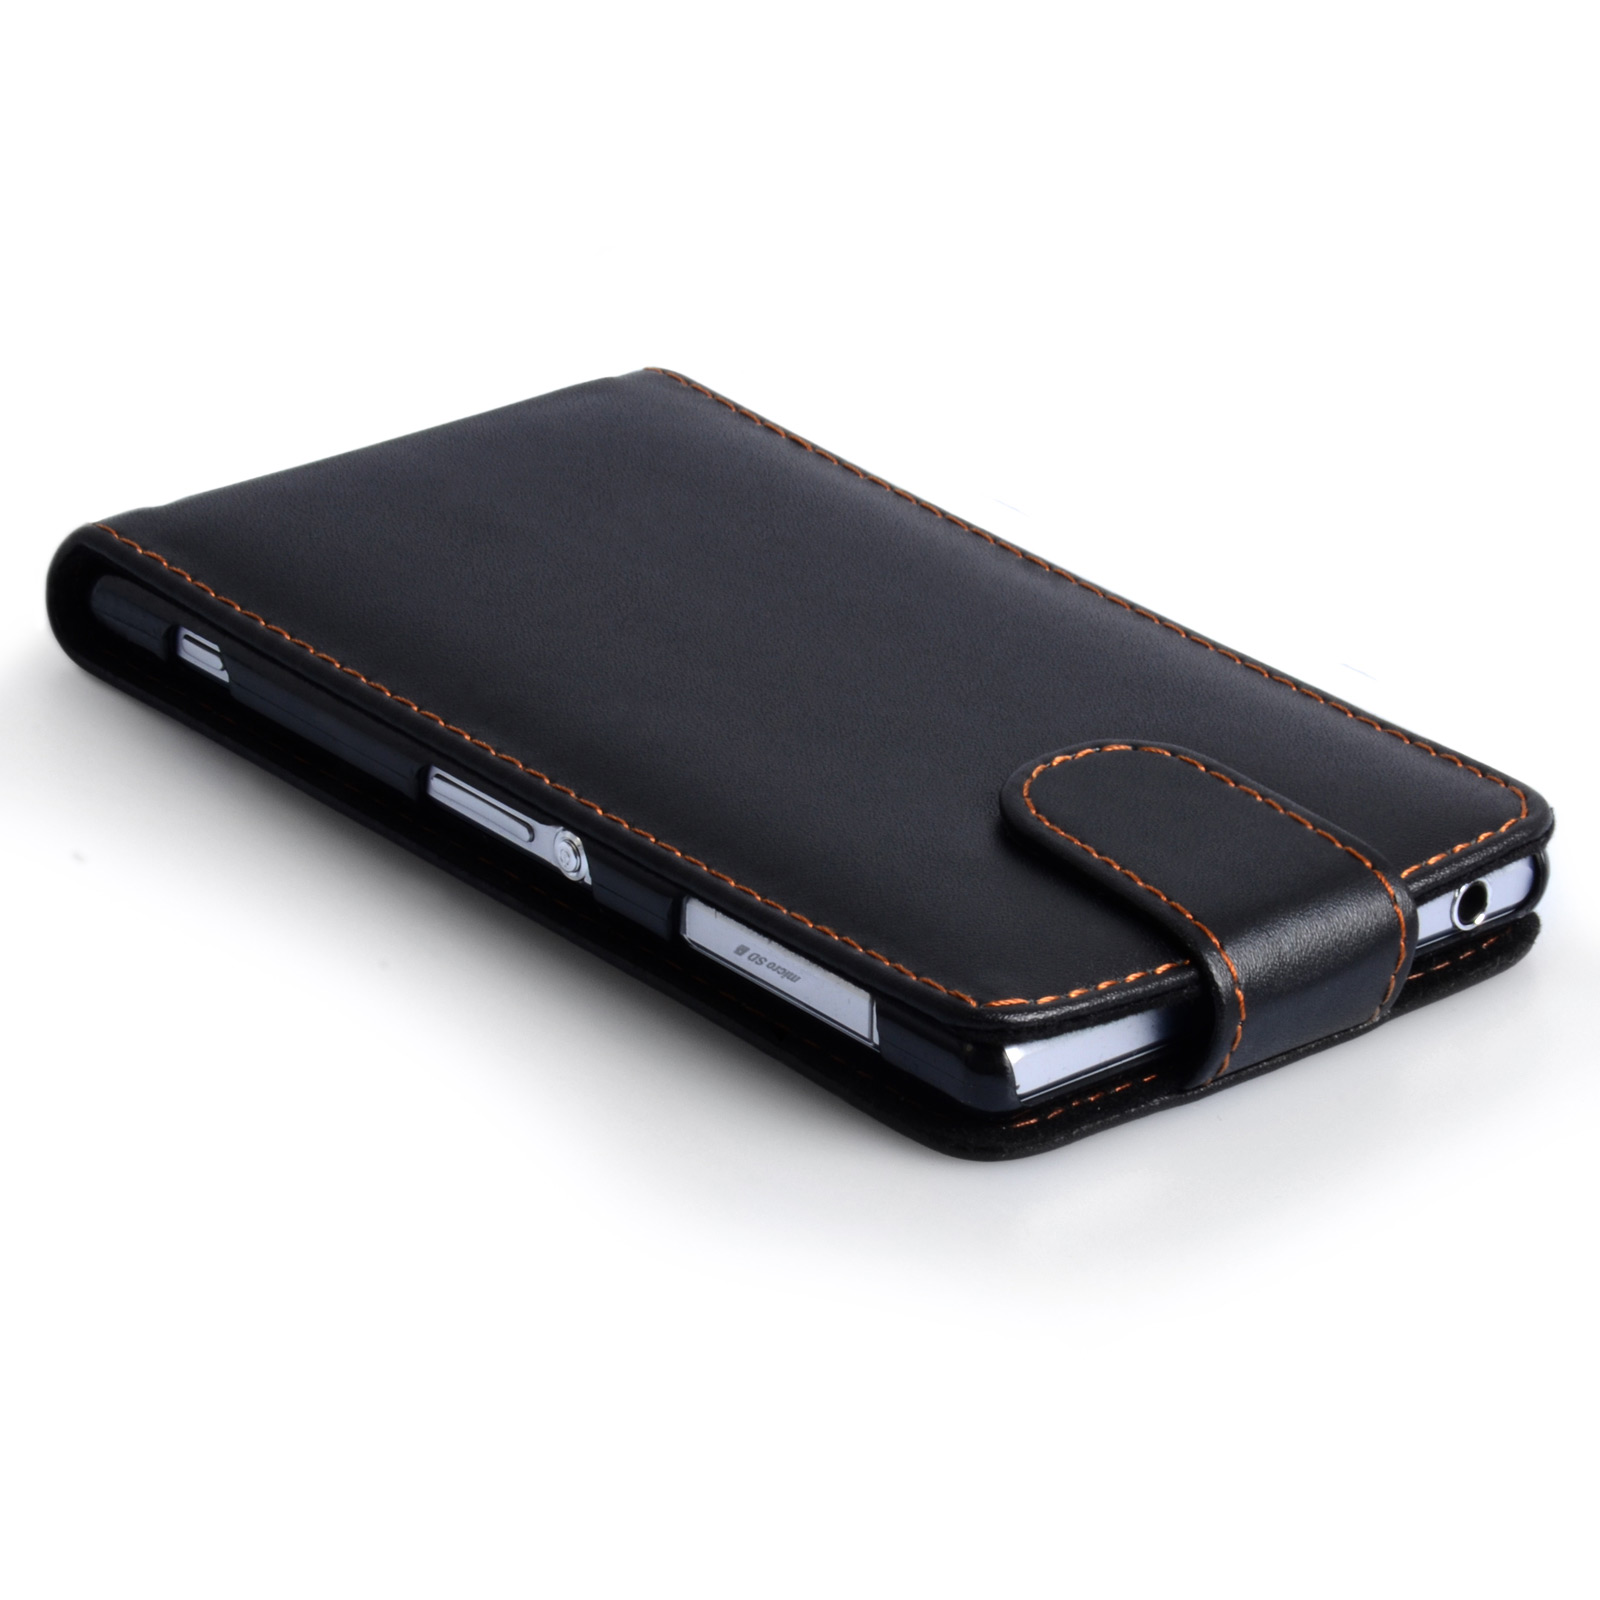 YouSave Accessories Sony Xperia Z2 Leather-Effect Flip Case - Black